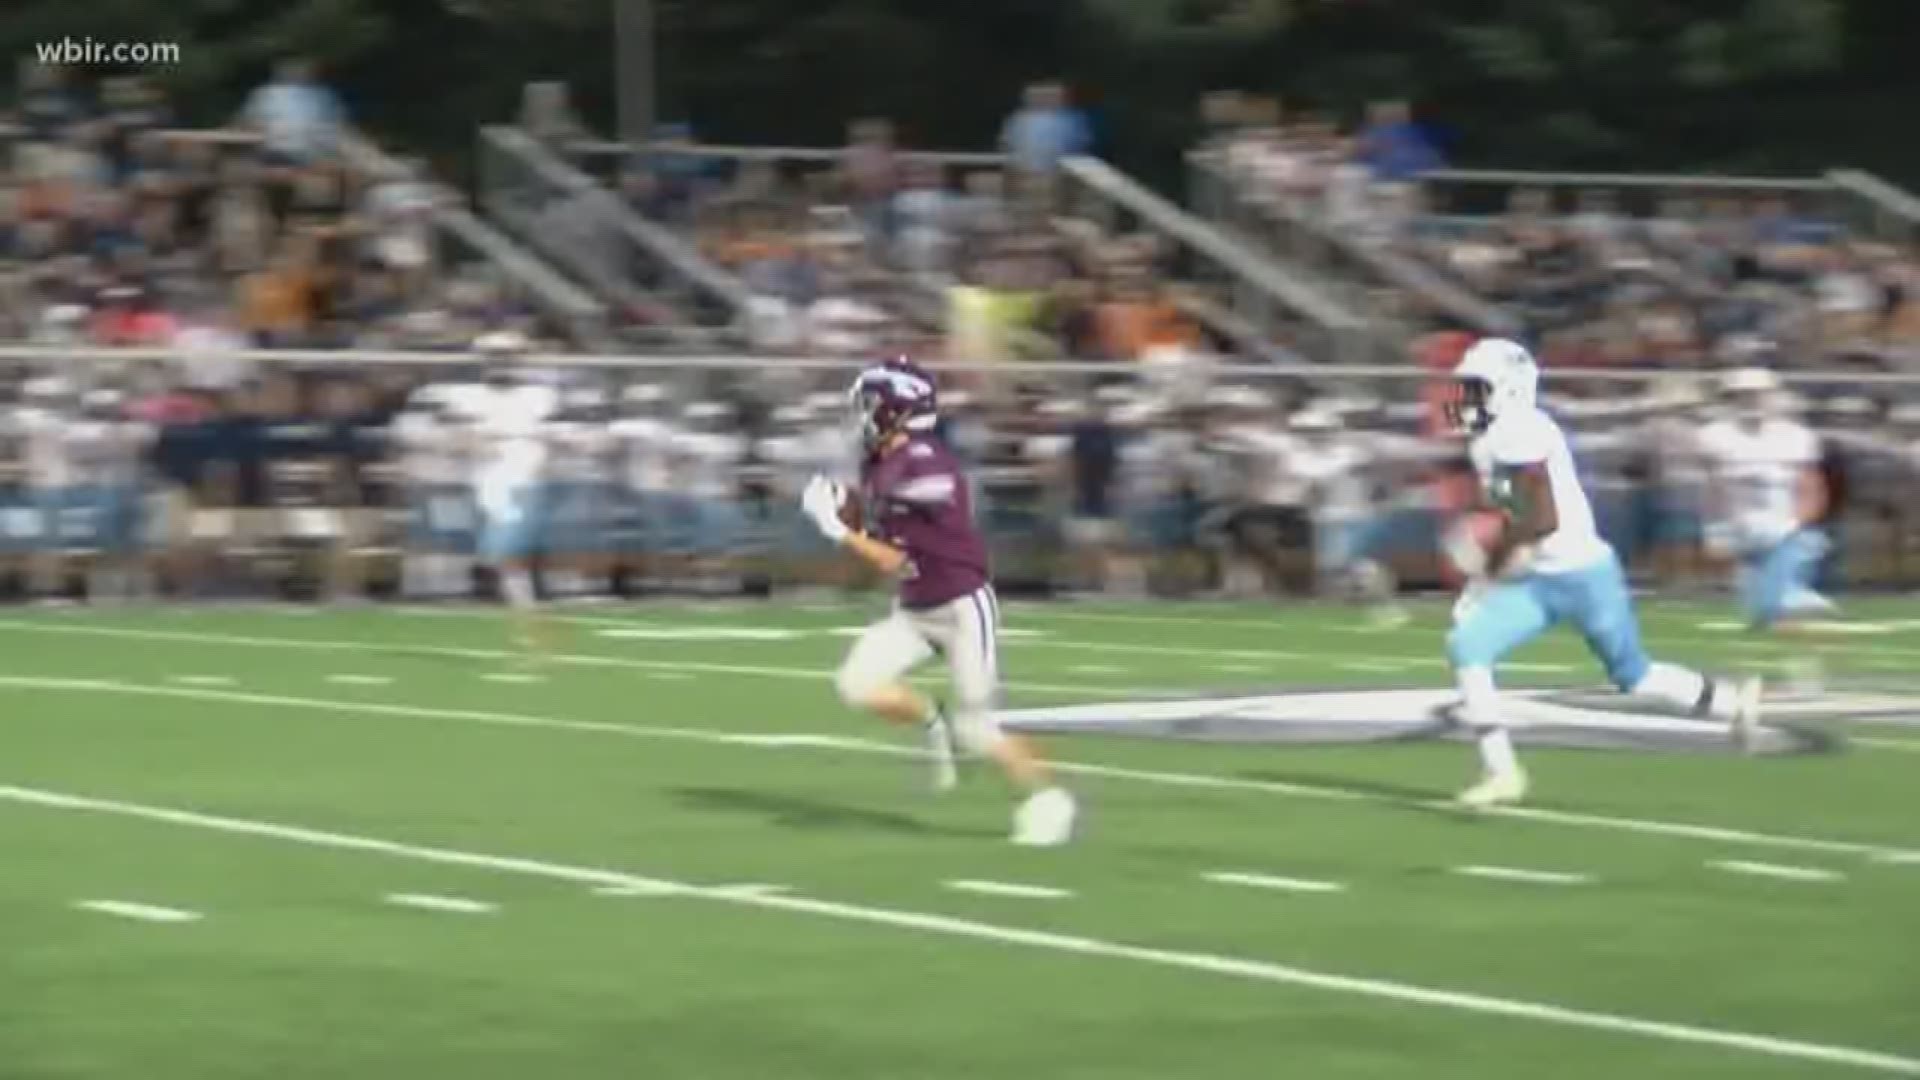 Dobyns-Bennett picks up a win against Hardin Valley in week 5 action.